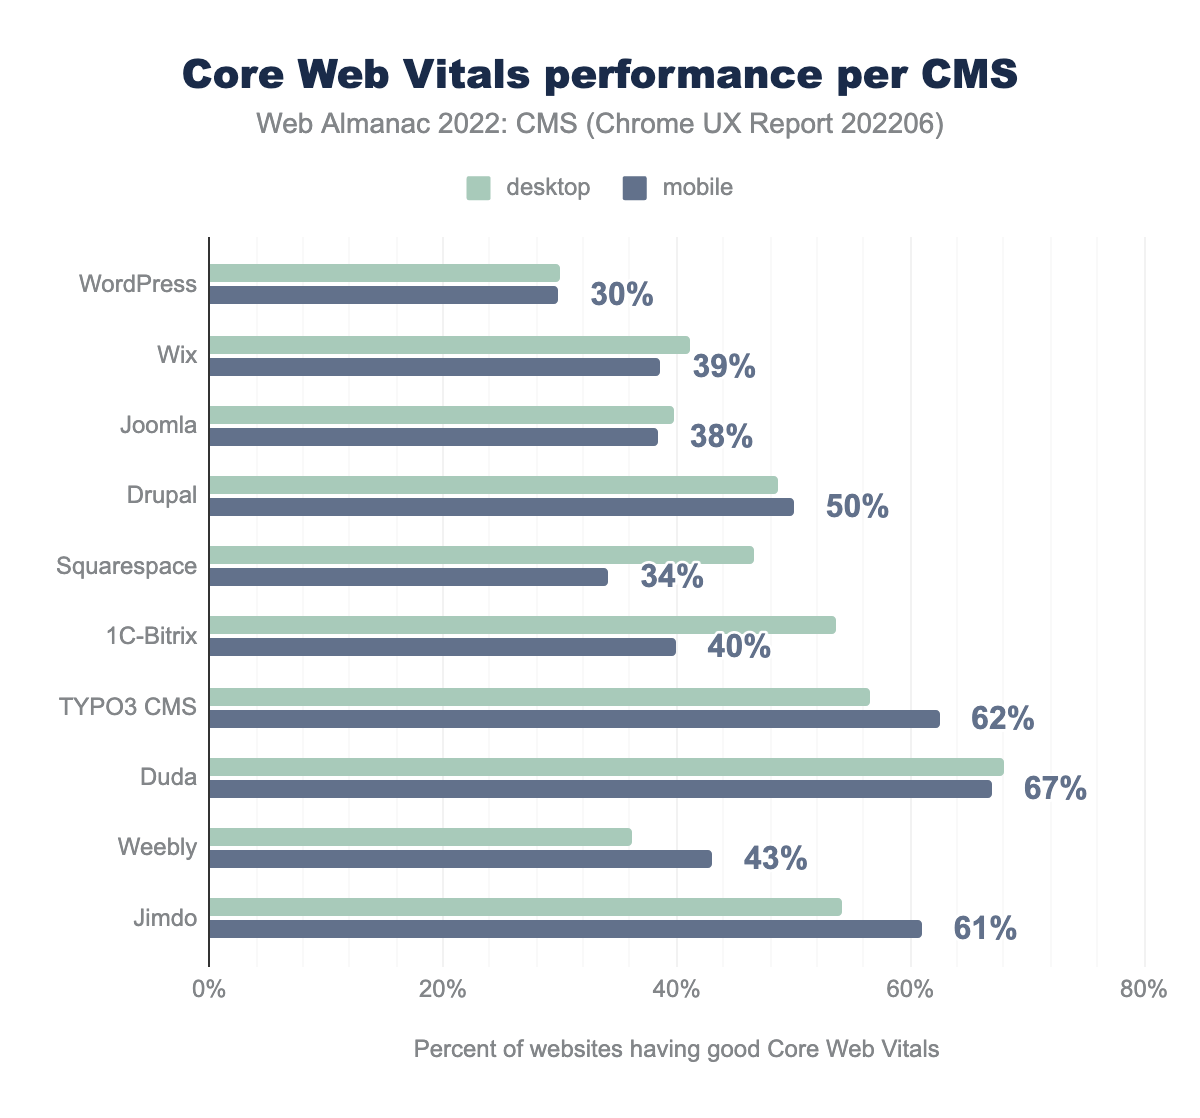 Core web vitals performance by CMS.